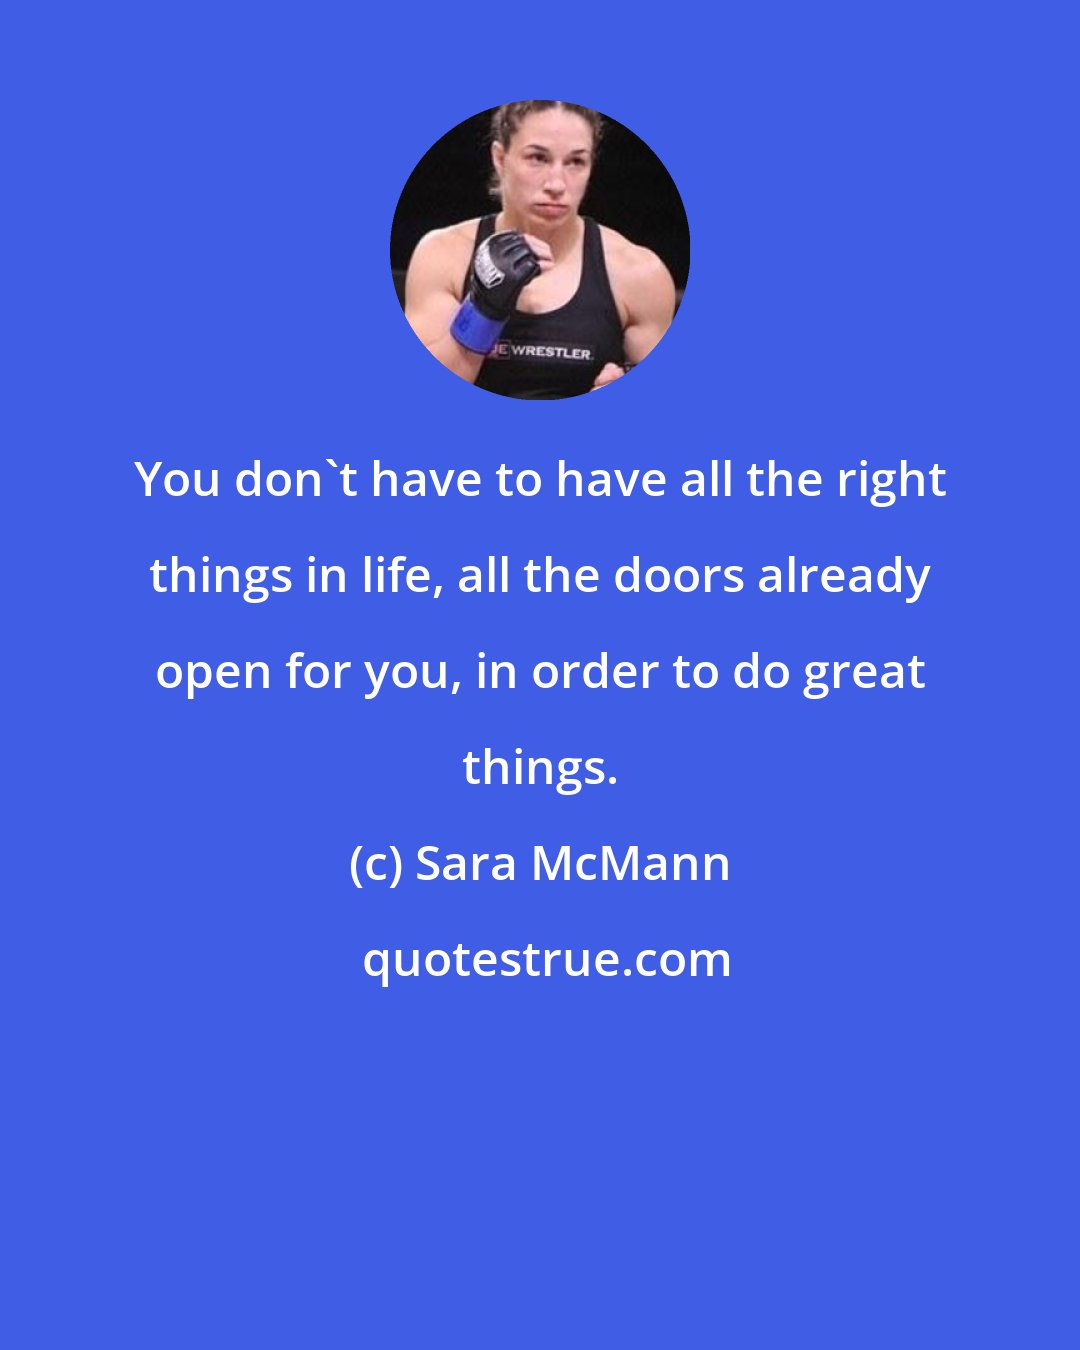 Sara McMann: You don't have to have all the right things in life, all the doors already open for you, in order to do great things.